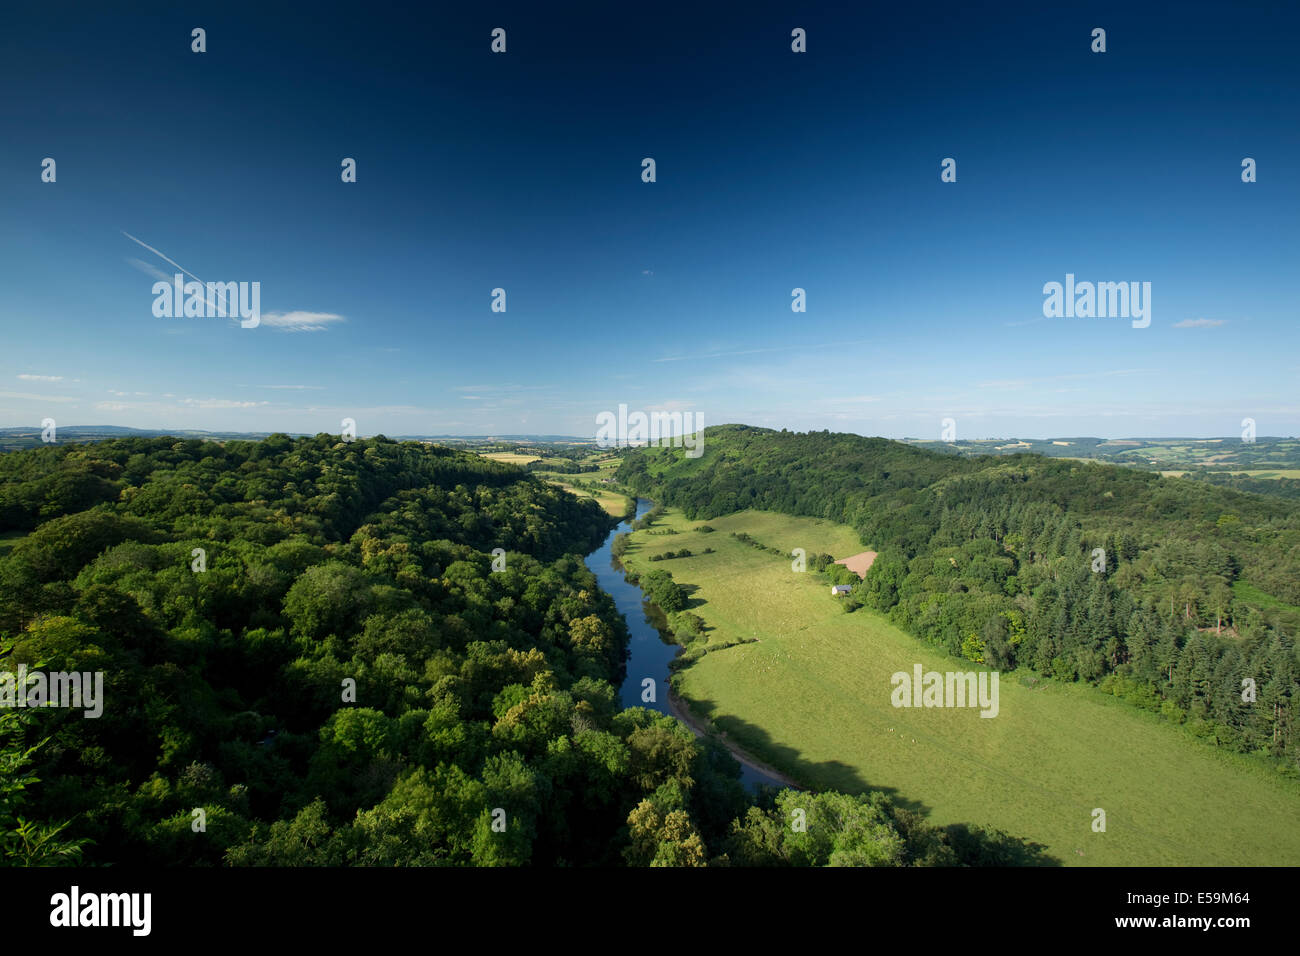 A view from Symonds Yat Rock or the River Wye Valley Stock Photo